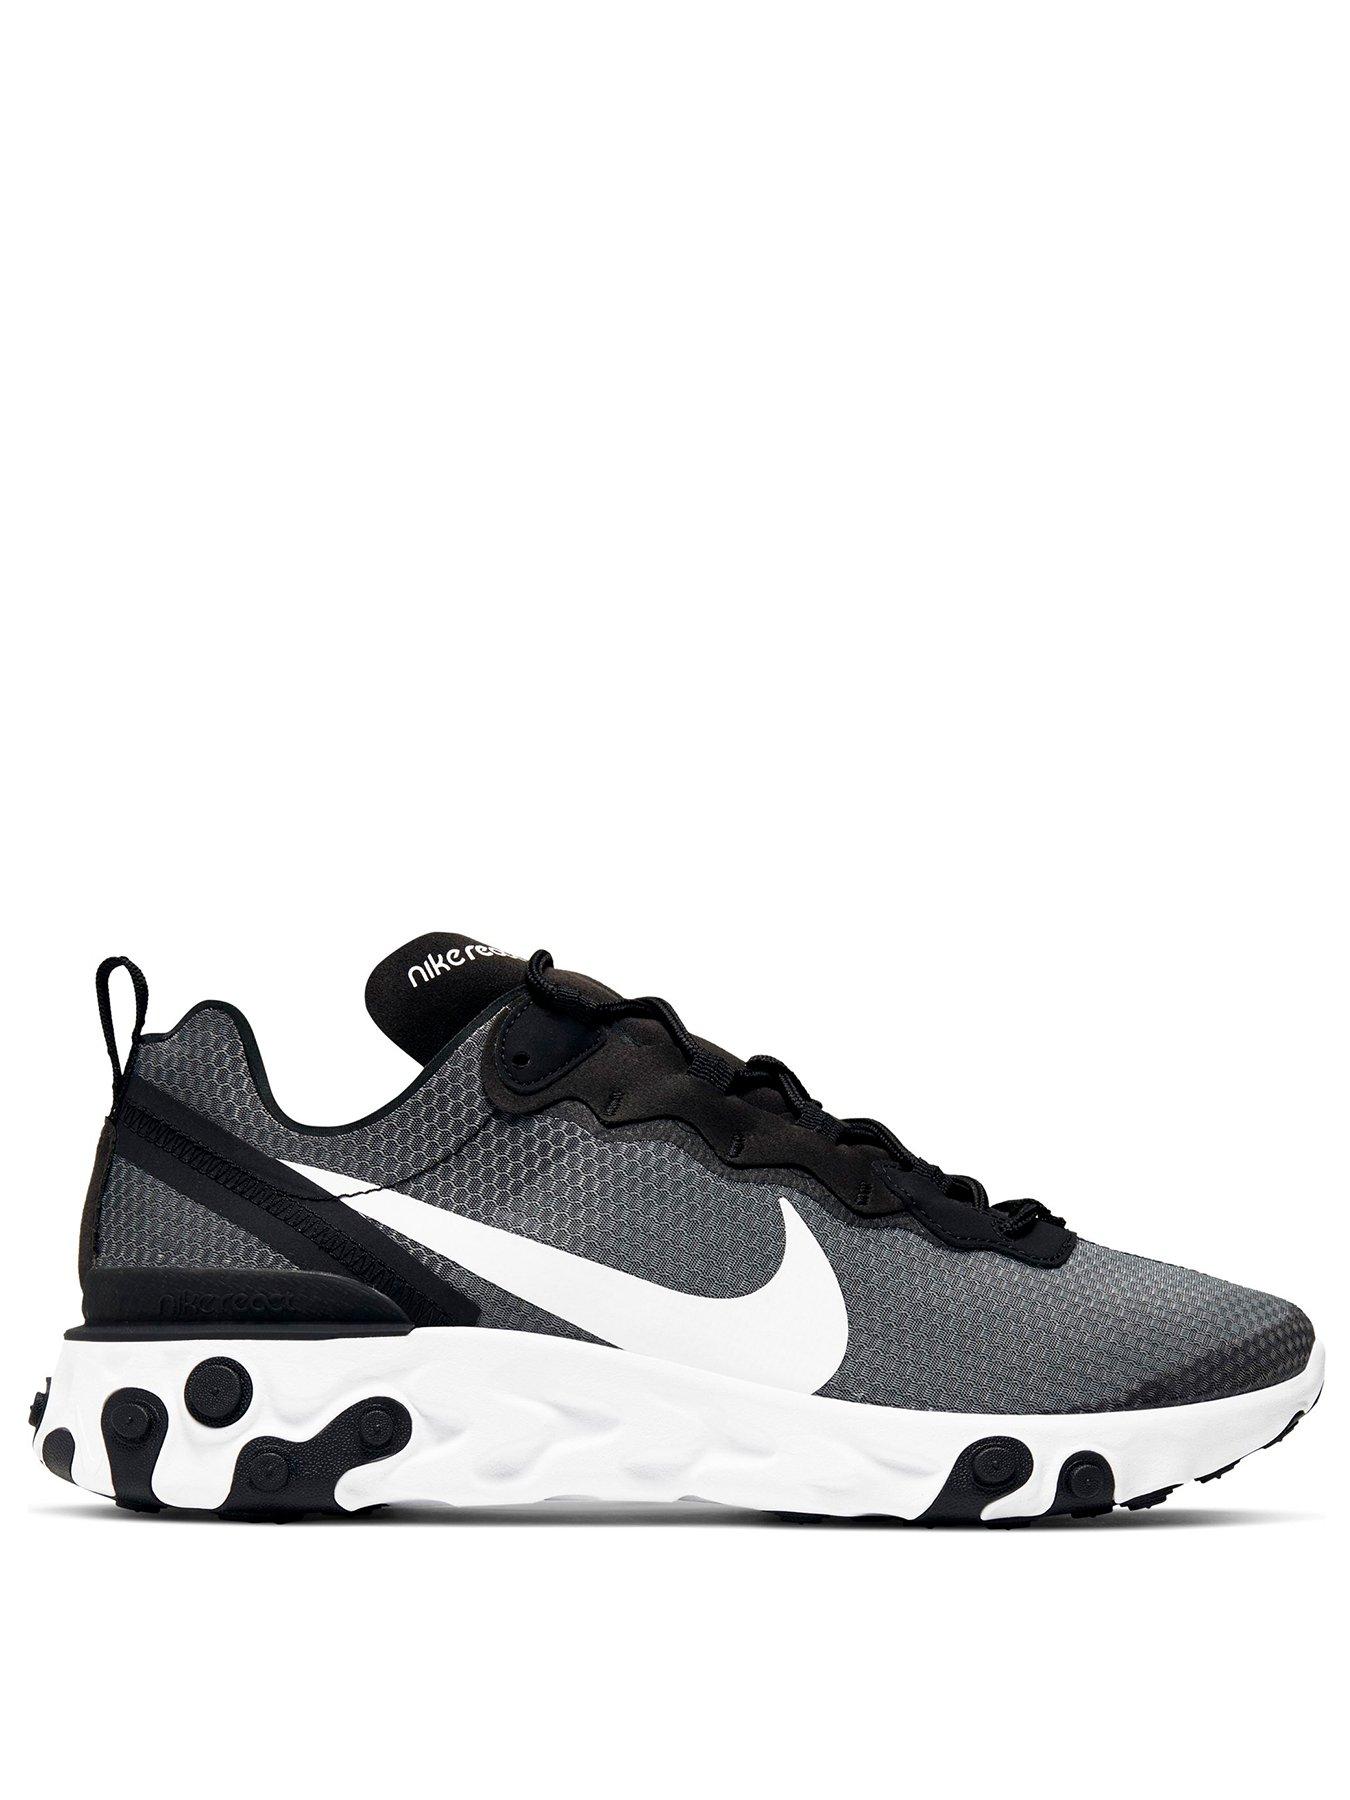 nike react element 87 size guide